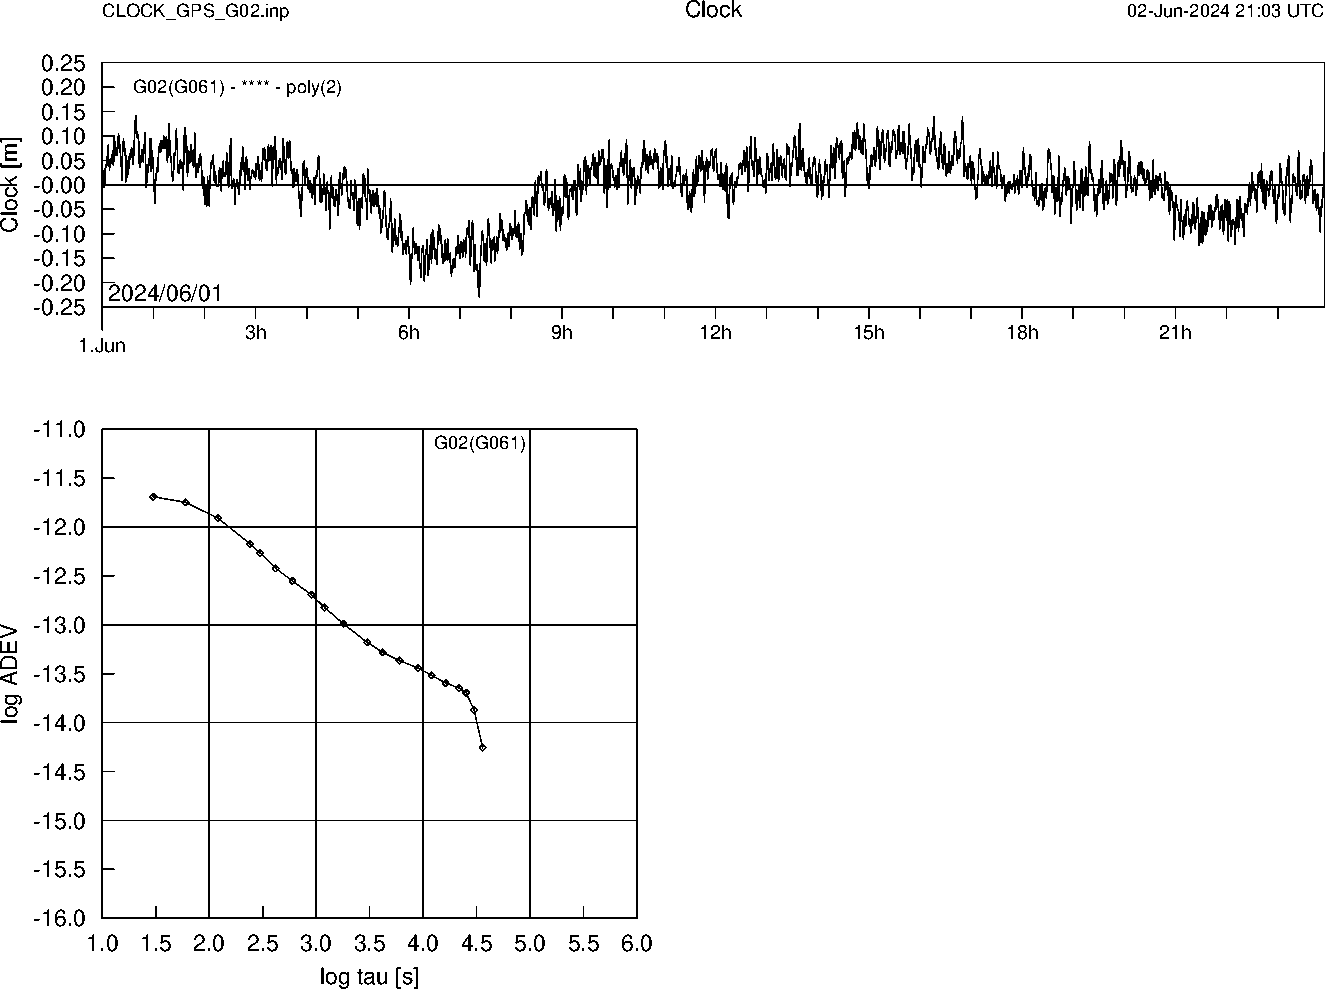 GPS G02 Clock Time Series and Allan Deviation